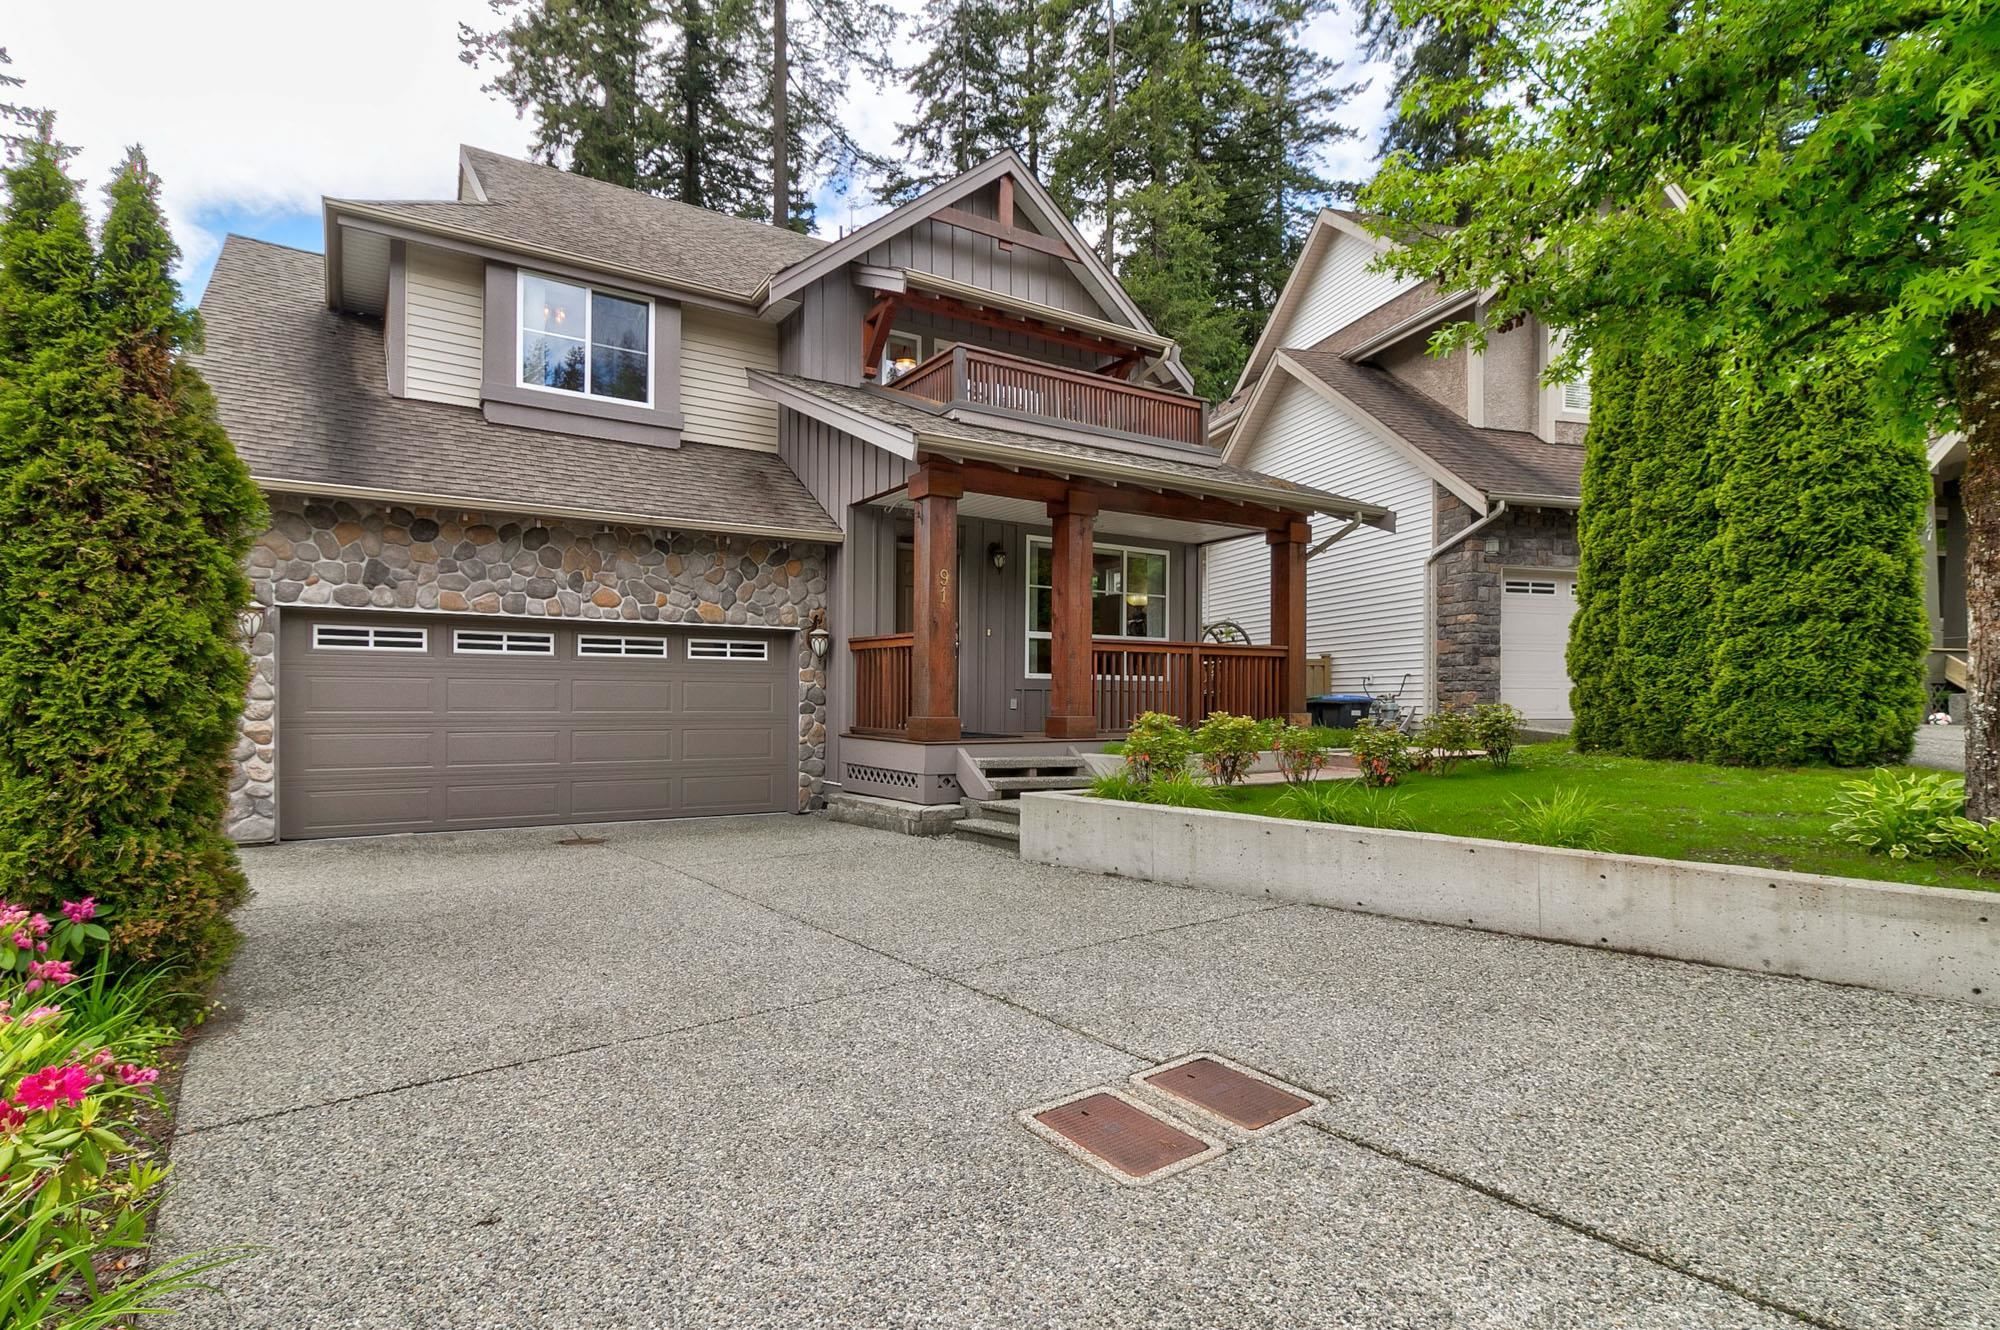 This property has sold: 91 HOLLY DR in Port Moody